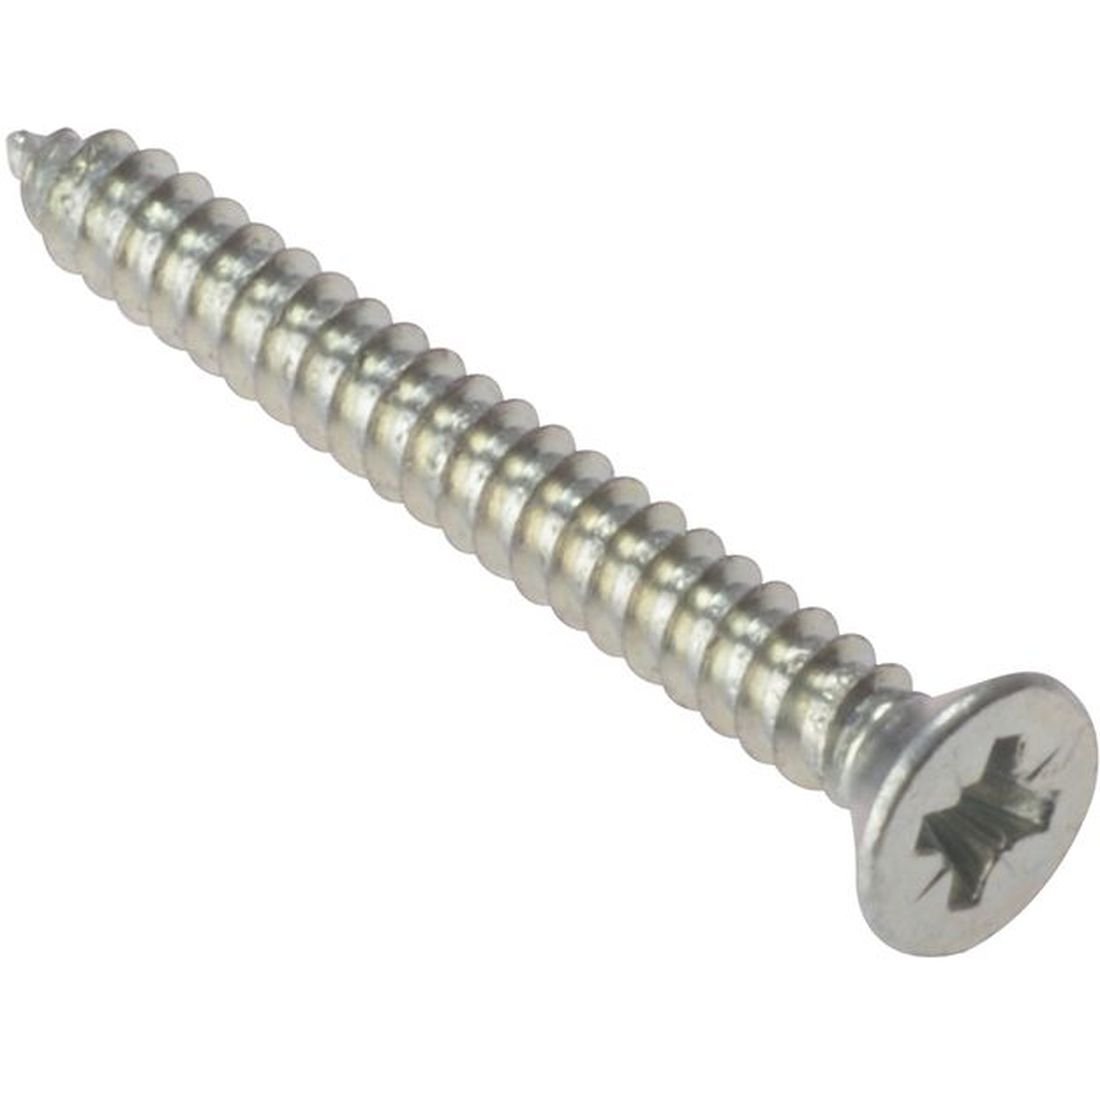 ForgeFix Self-Tapping Screw Pozi Compatible CSK ZP 1.1/4in x 8 Box 200                   